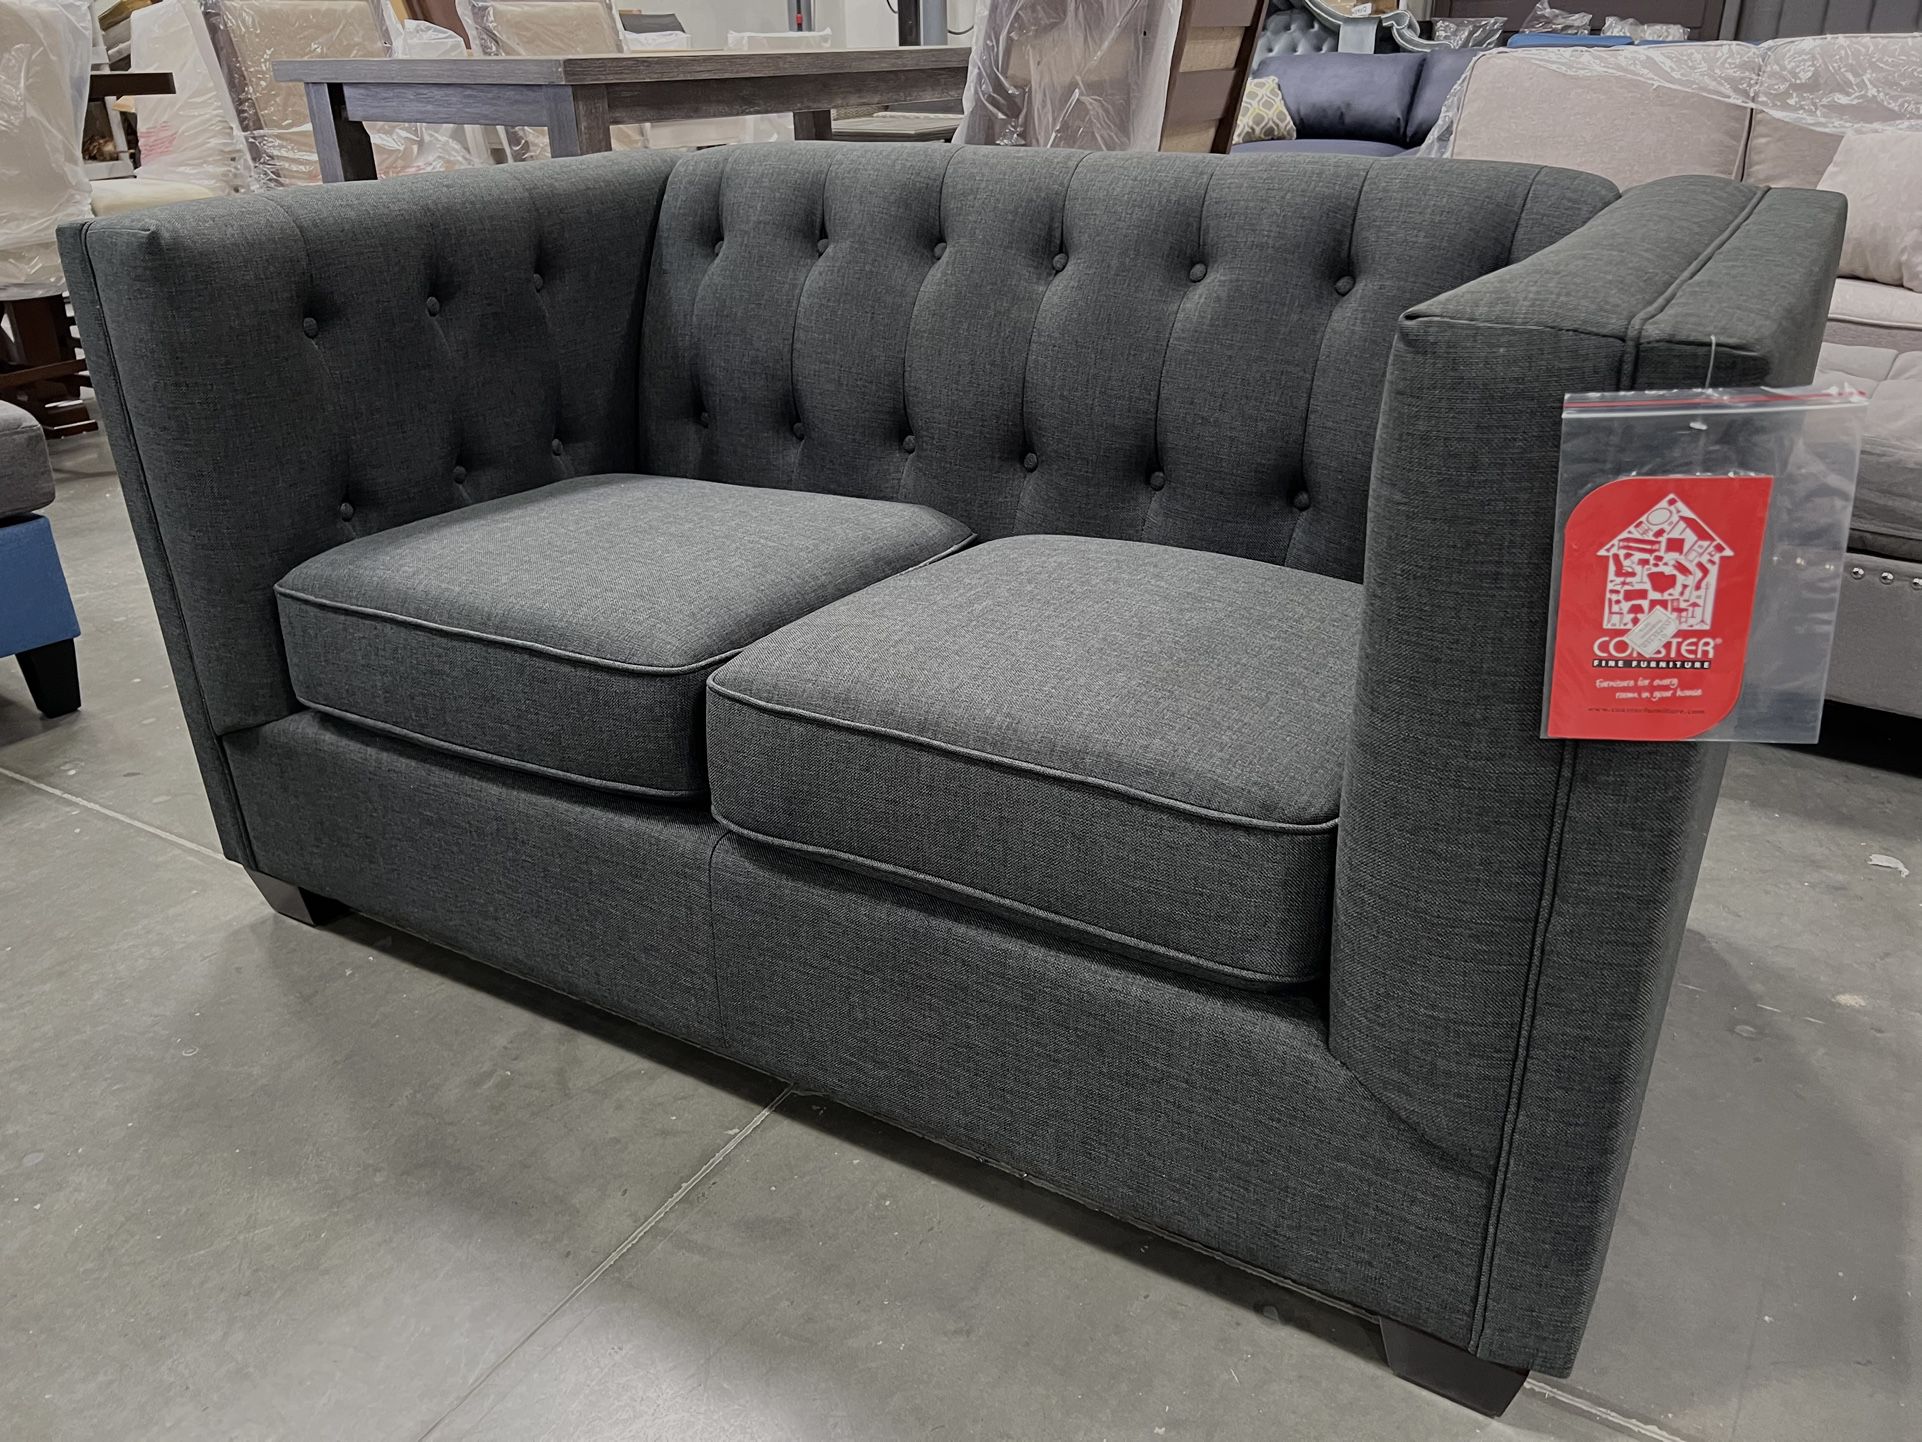 Brand New! Charcoal Grey Loveseat, Grey Sofa , Small Sofa For Bedroom, Living Room Couch, Grey Couch, Office Couch,sofa, Grey Sofa, Tufted Sofa